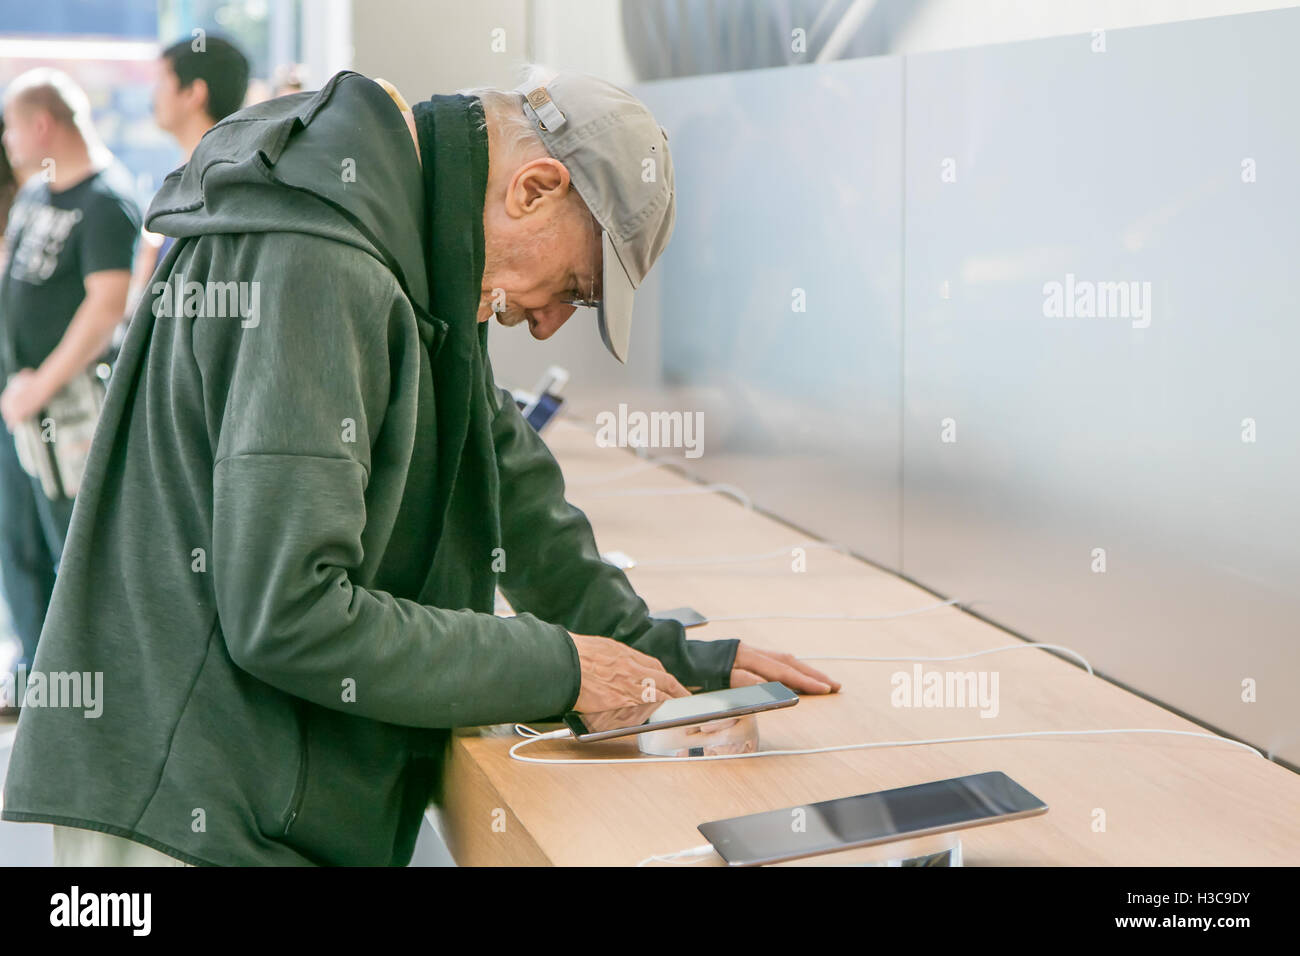 An elderly man is looking at an iPad tablet in the Apple store on Manhattan's Upper West Side. Stock Photo